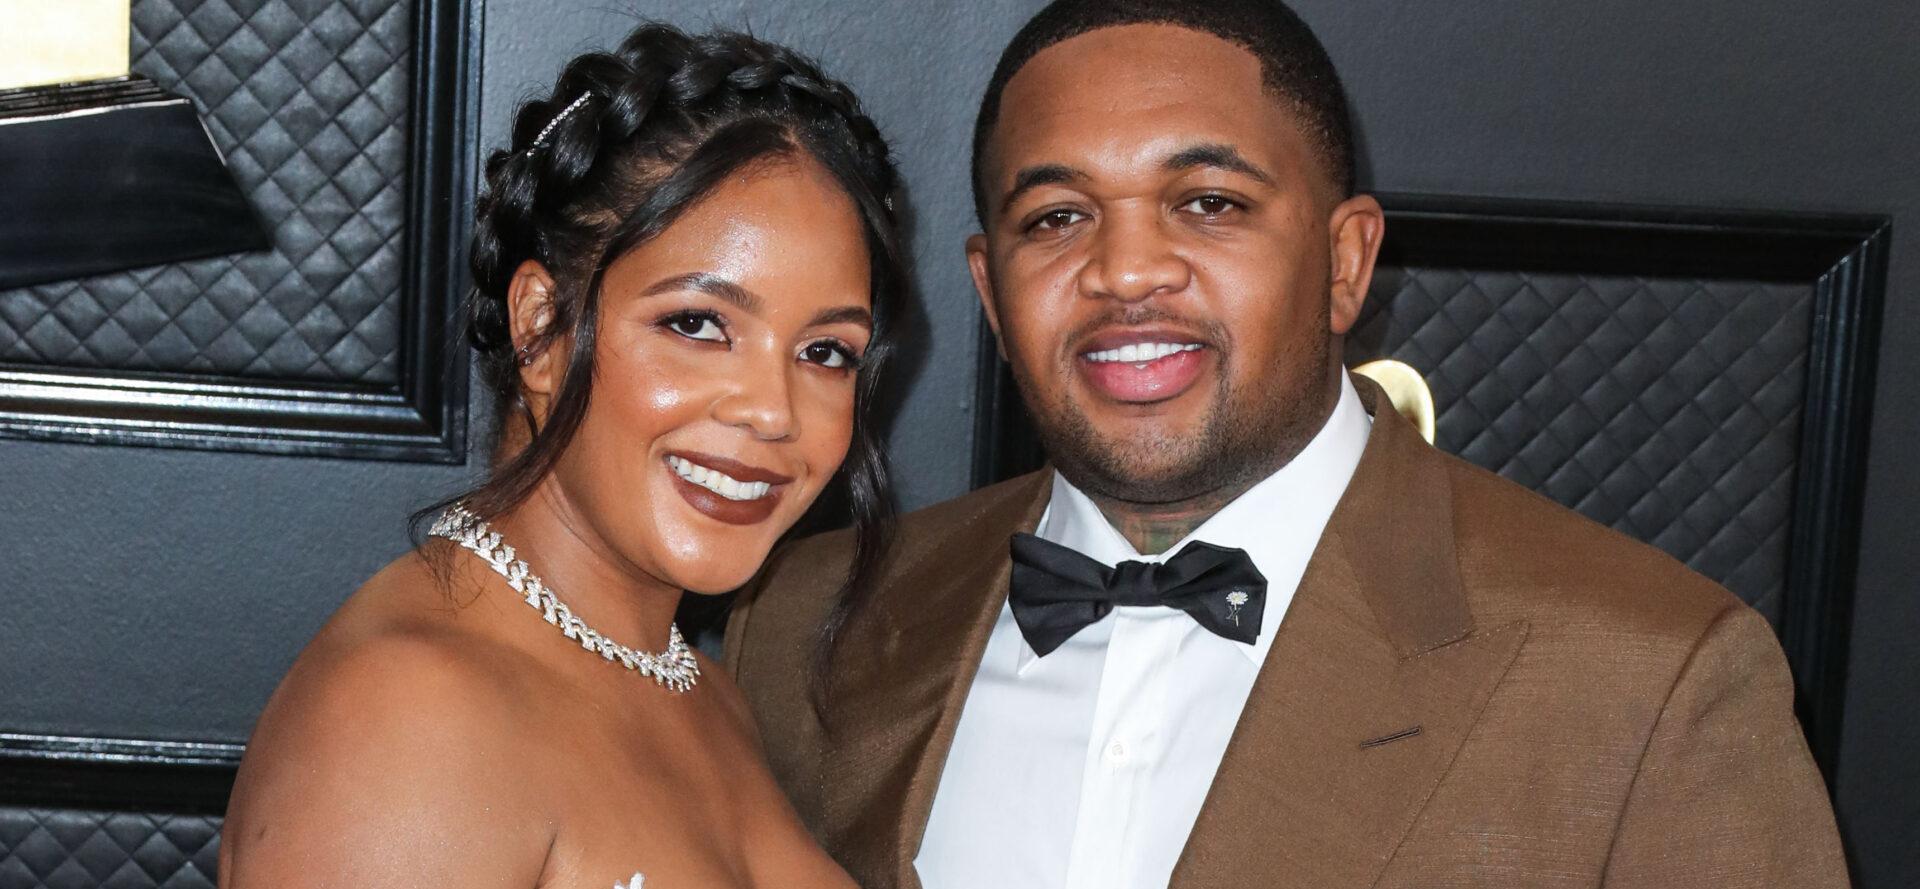 DJ Mustard Scores Massive Win In Court, Only Paying $24K In Monthly Support